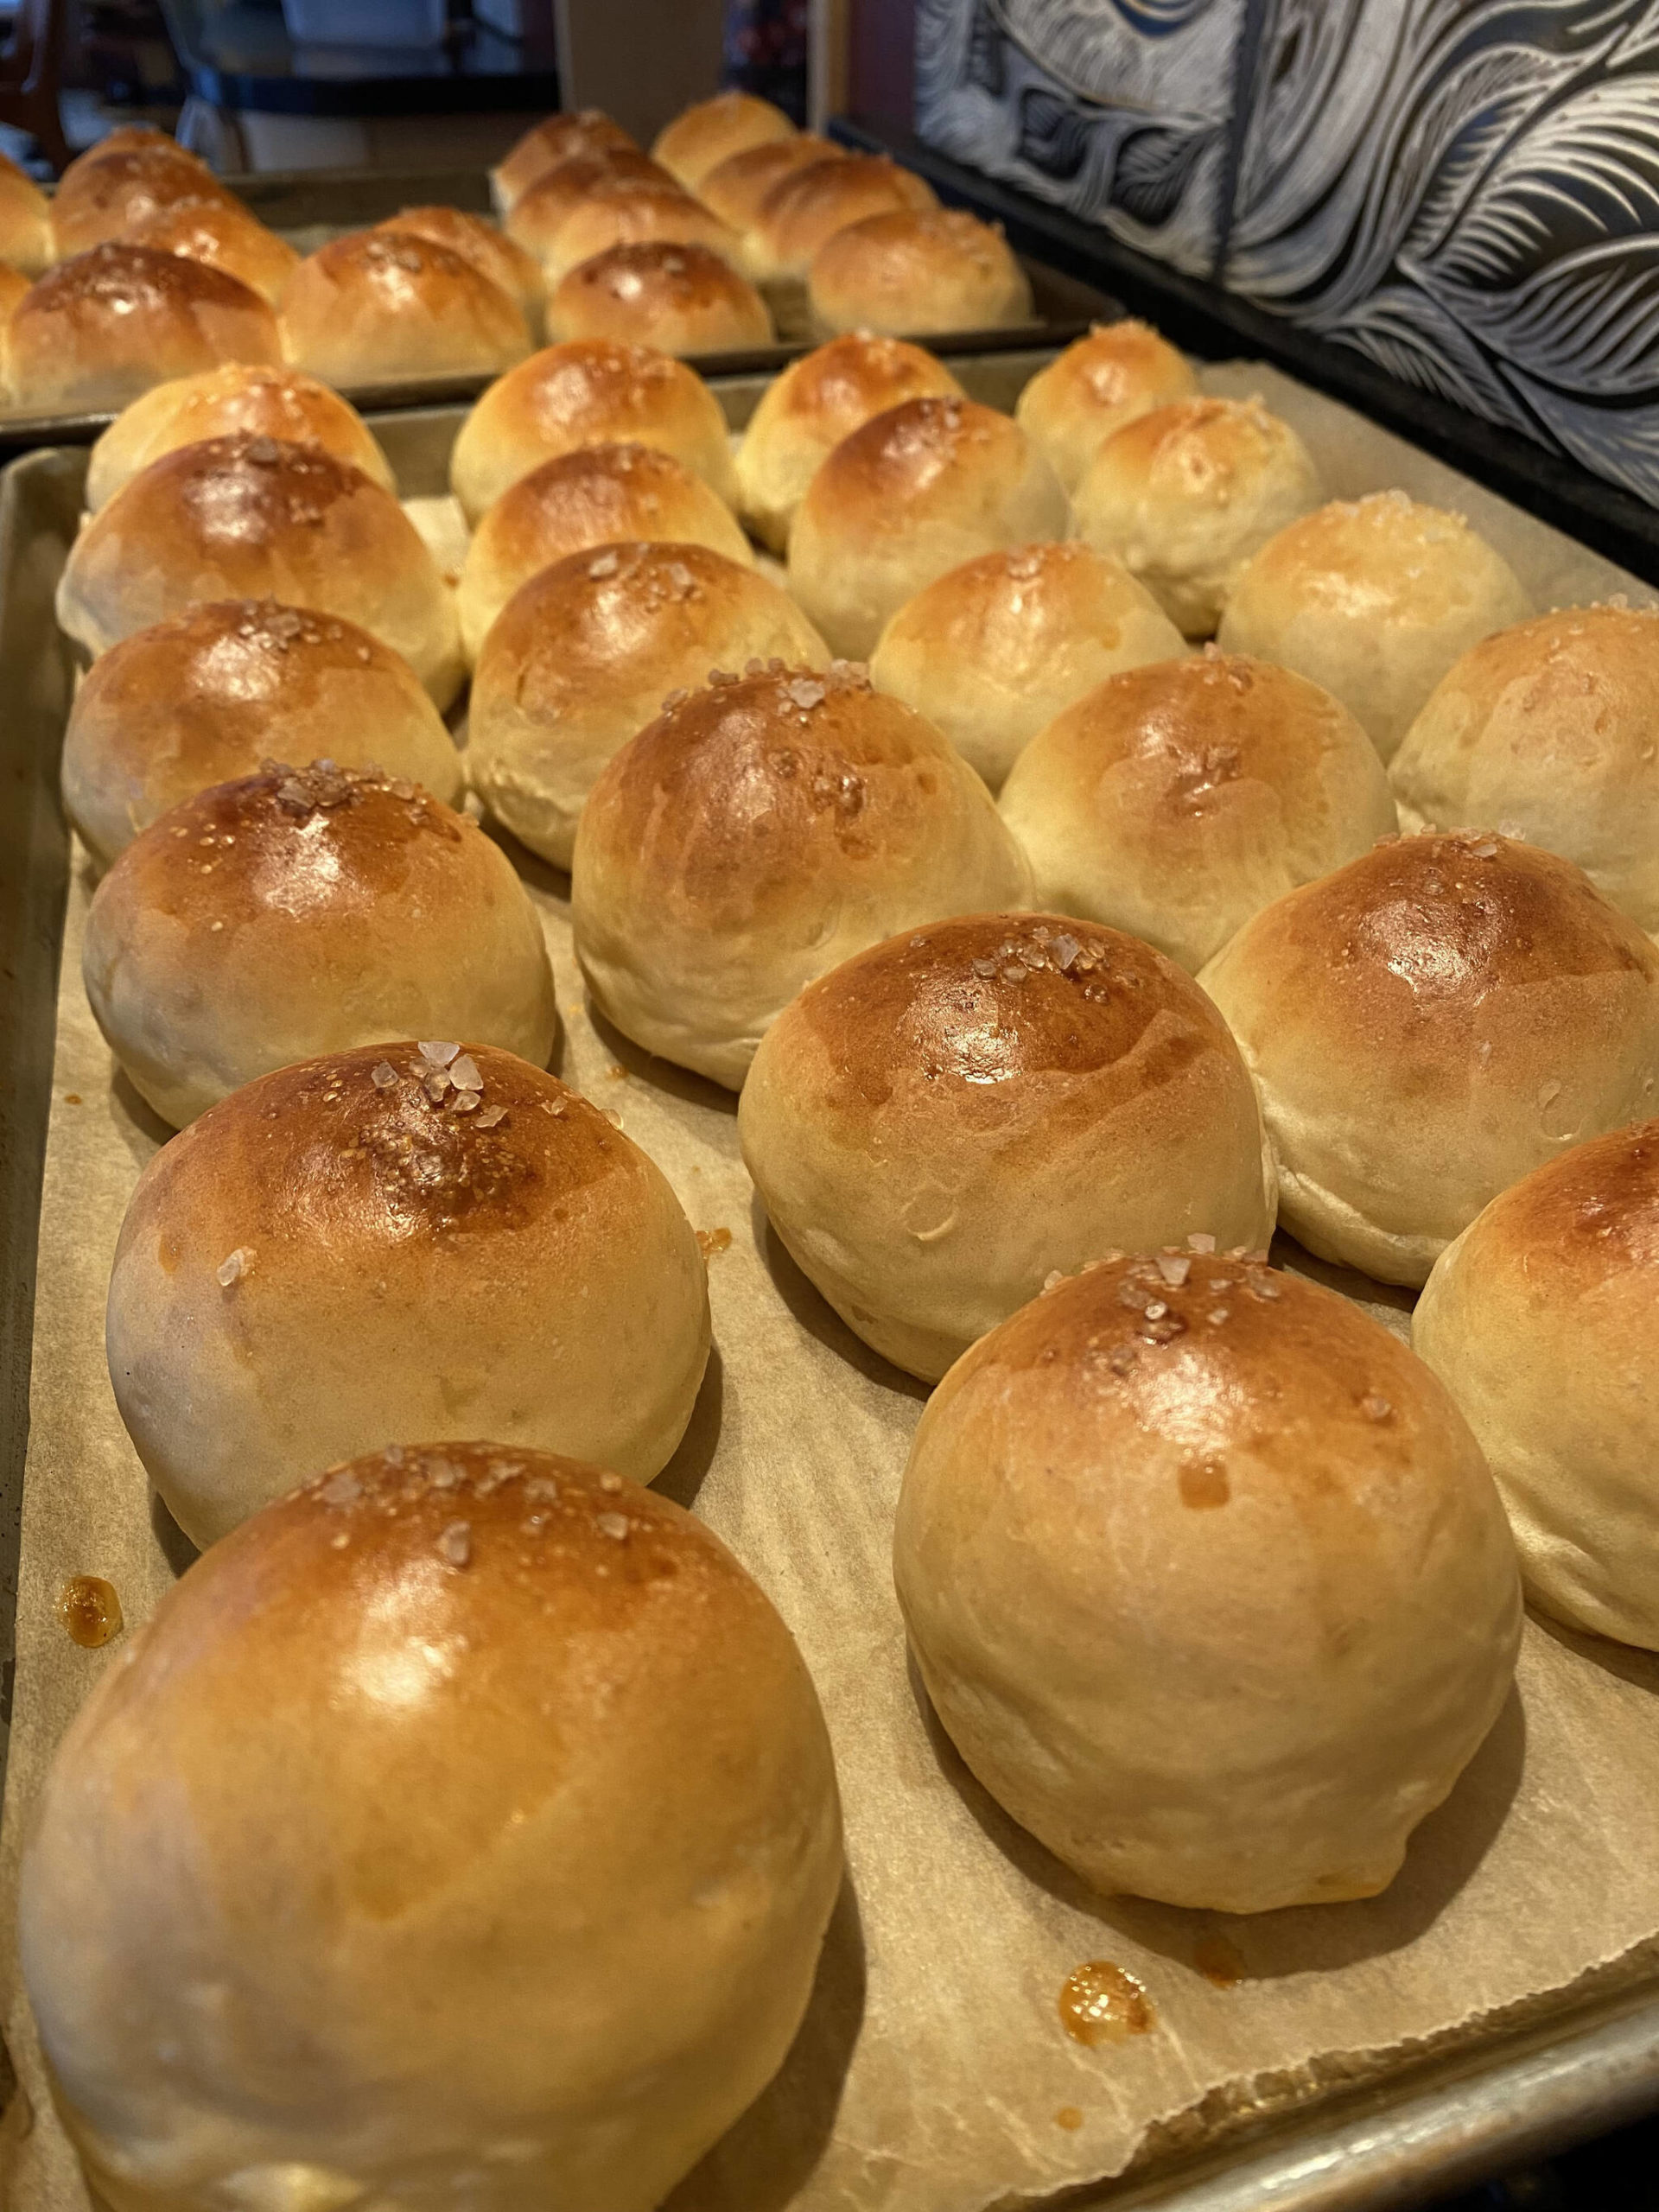 Dairy-free dinner rolls only take a little bit of time and a few substitutions. (Photo by Tressa Dale/Peninsula Clarion)